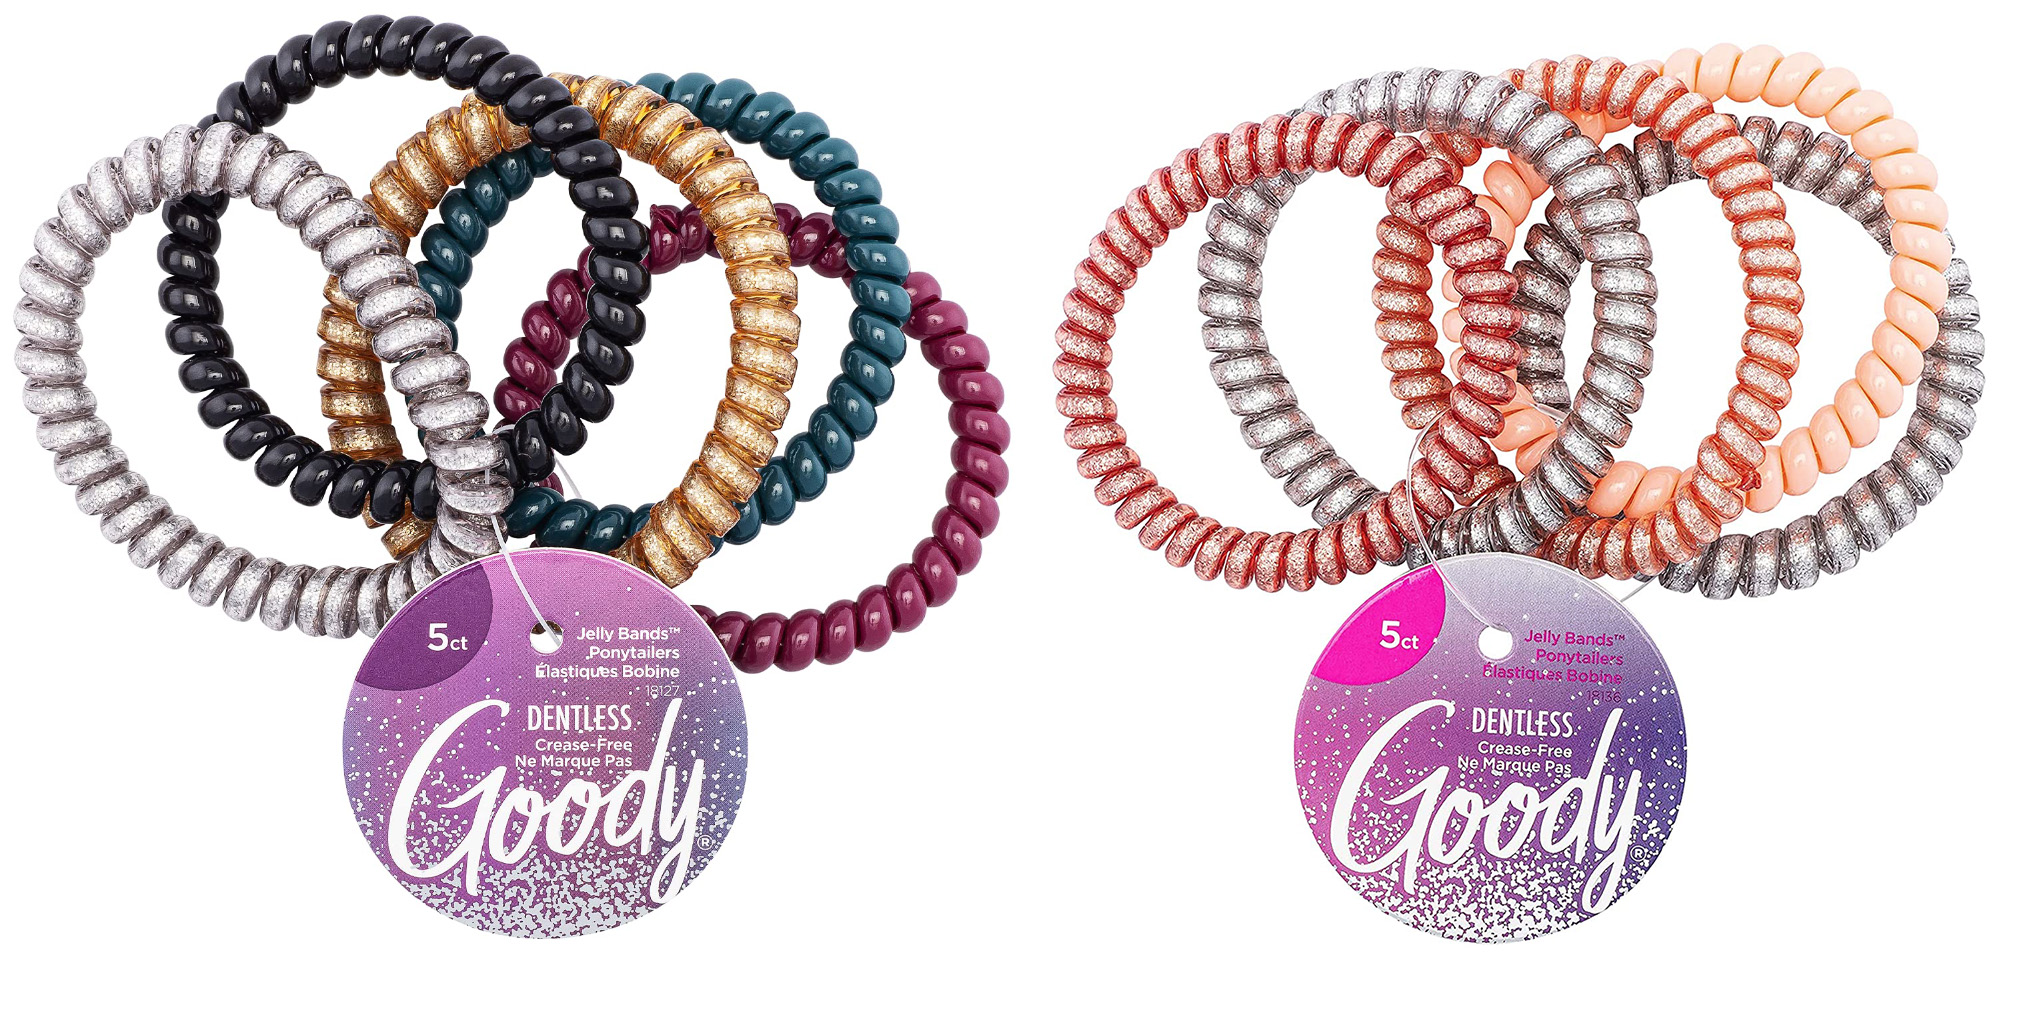 Goody Icy Holiday Skinny Coils 5ct